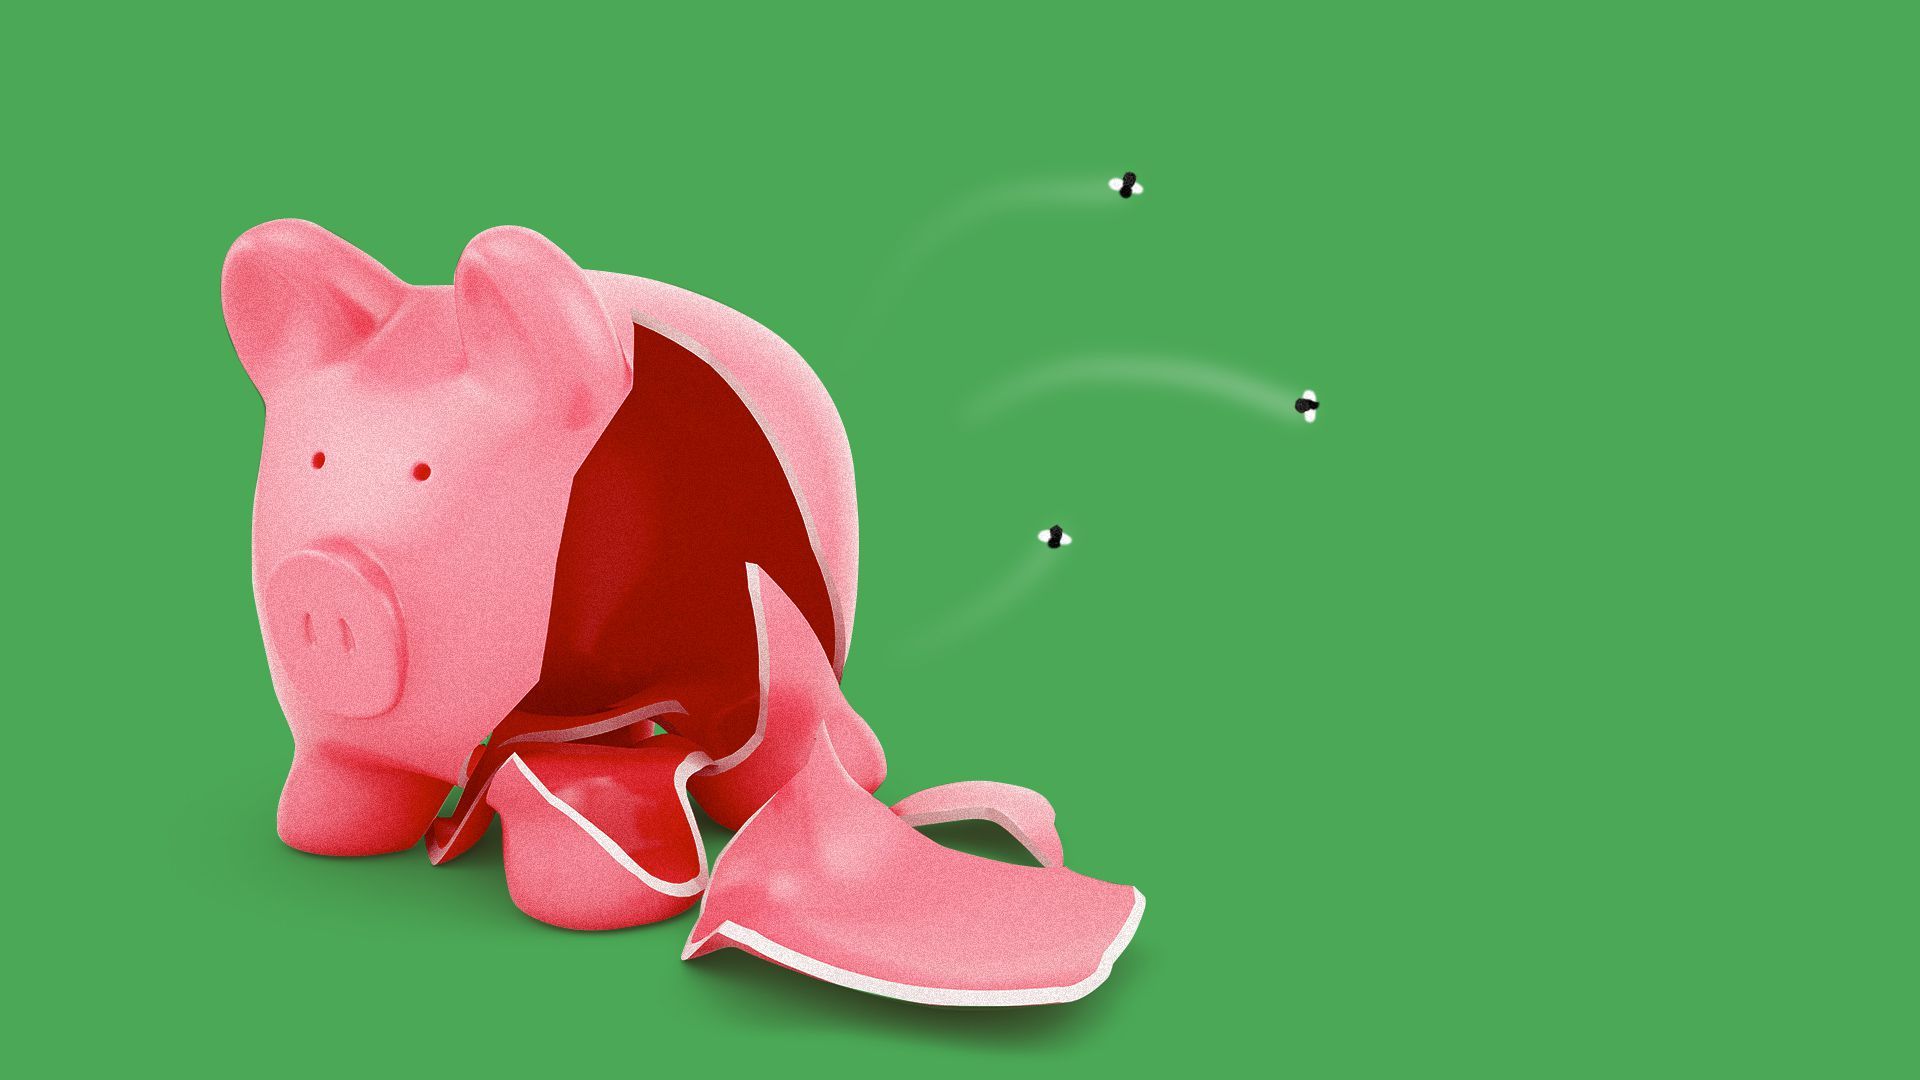 Illustration of a broken empty piggy bank with flies coming out.  